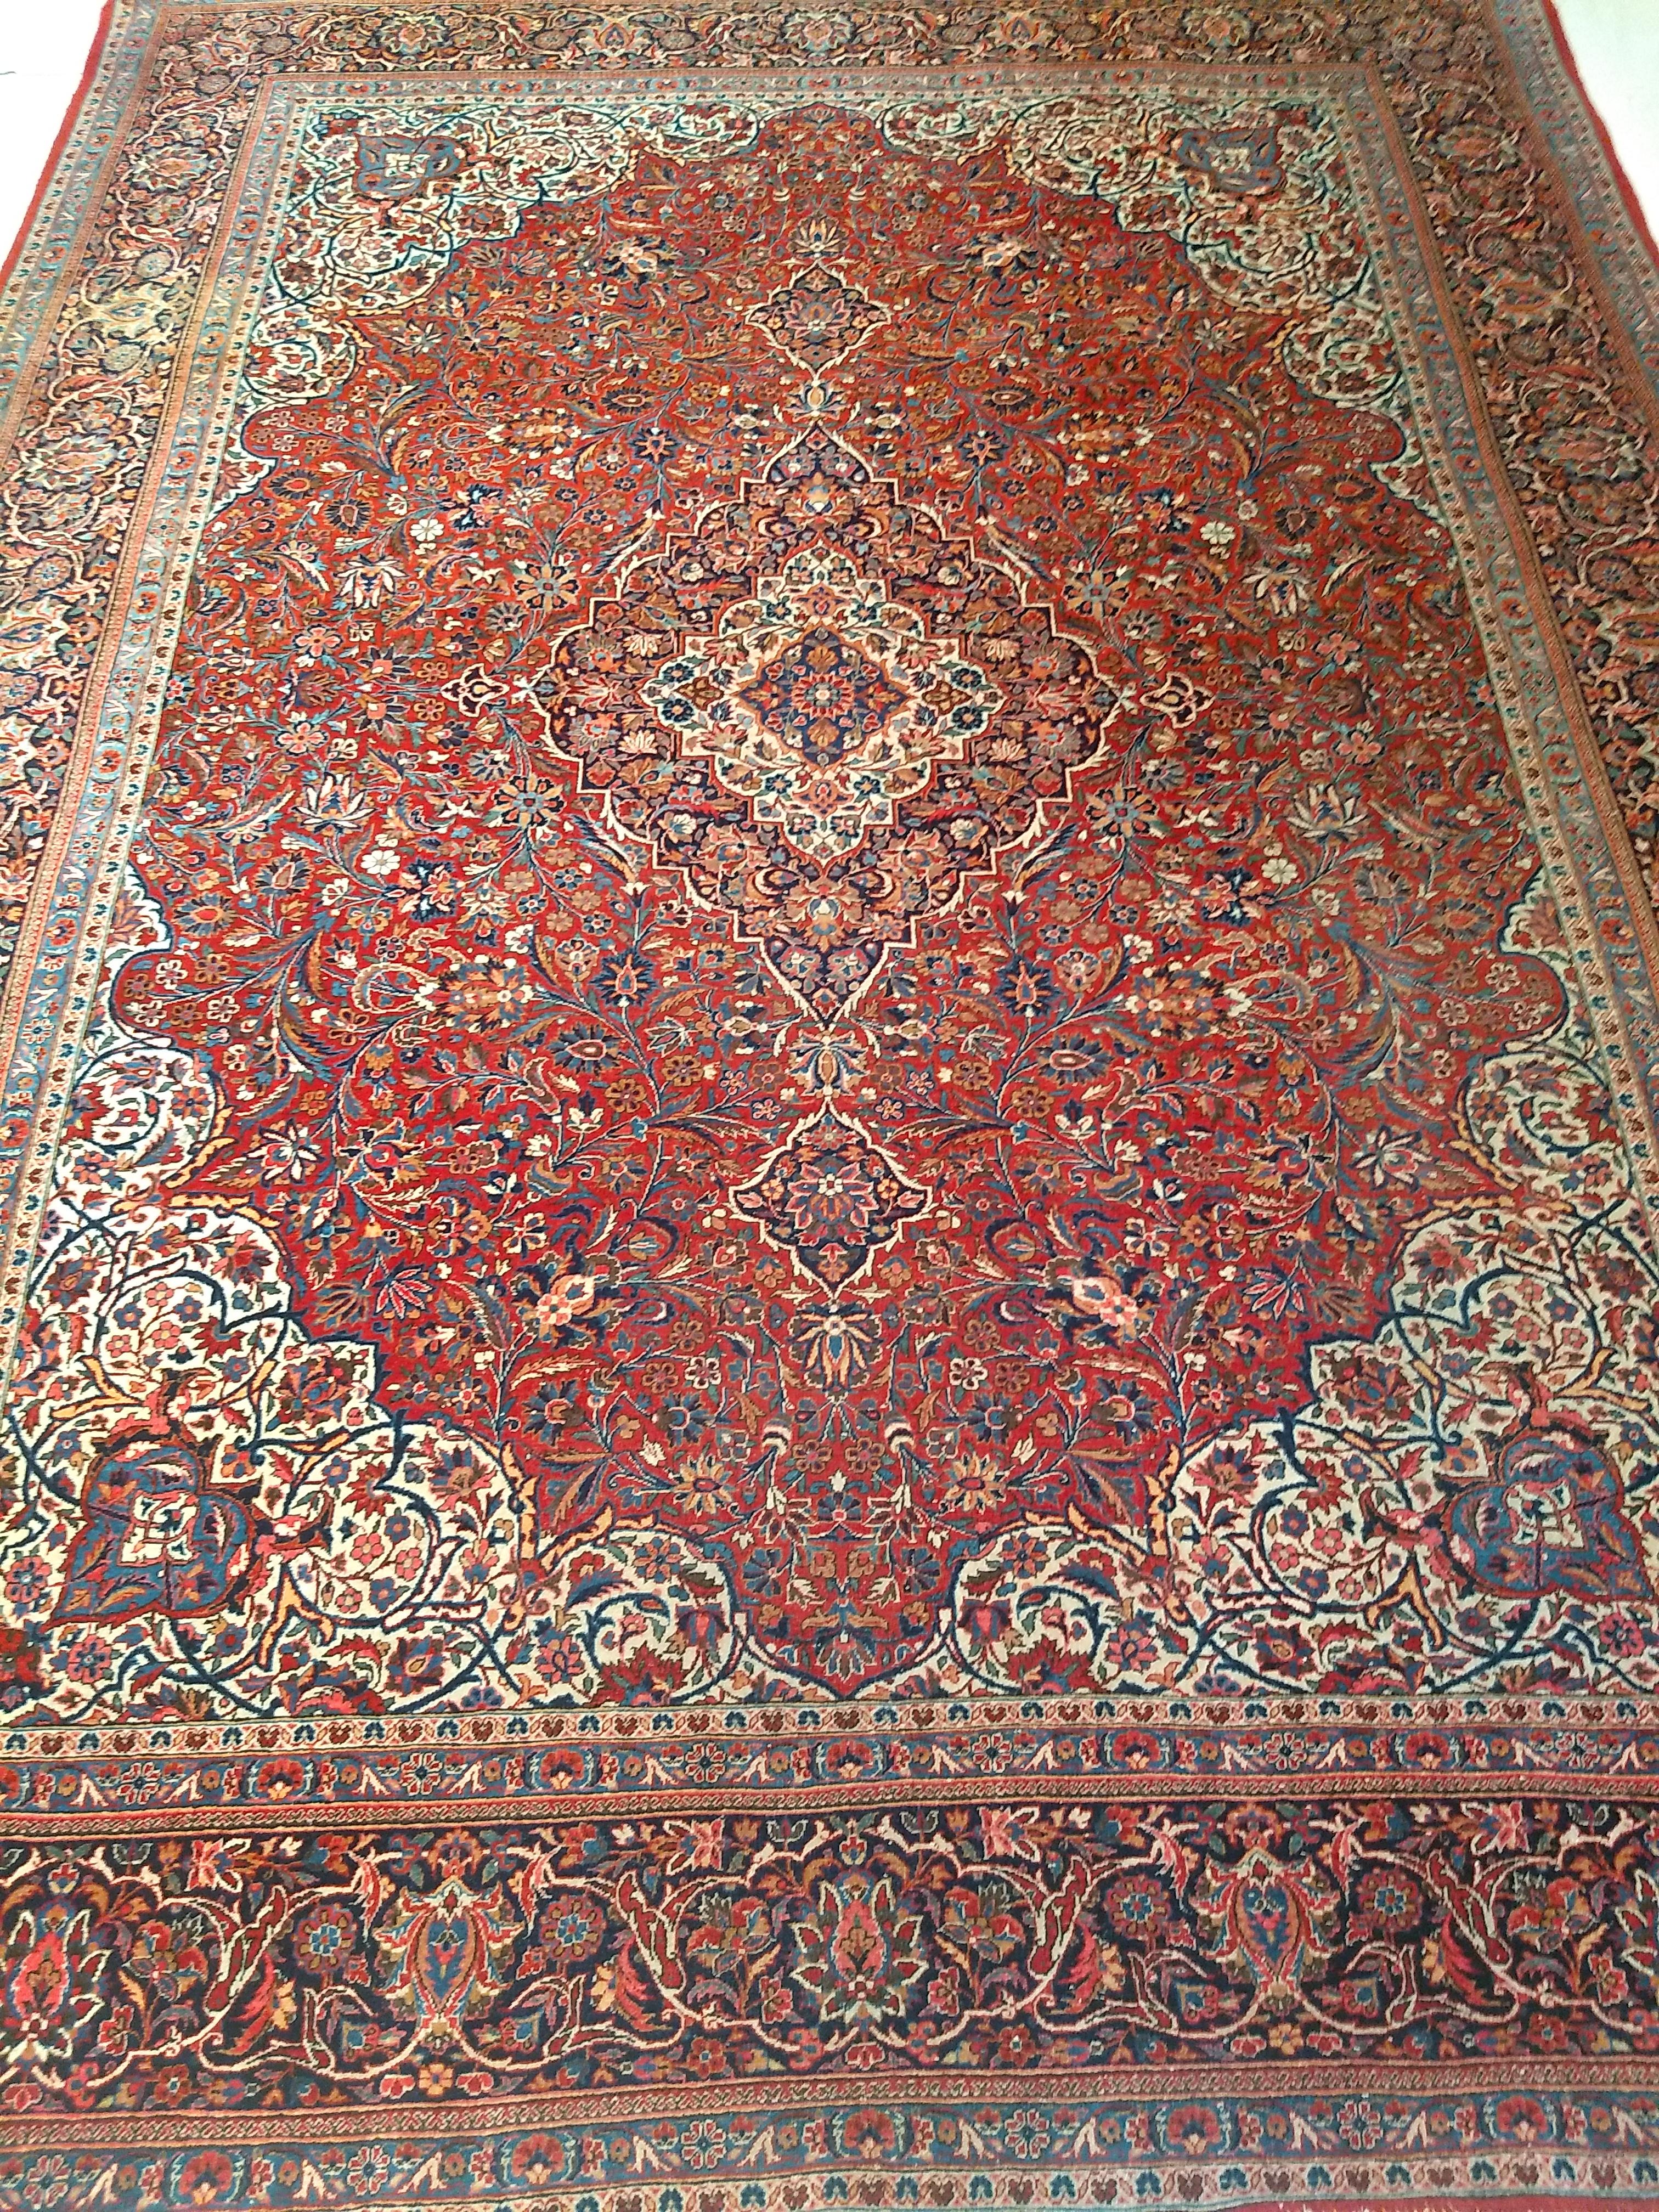 Early 20th century Persian Kashan in a classic Kashan 